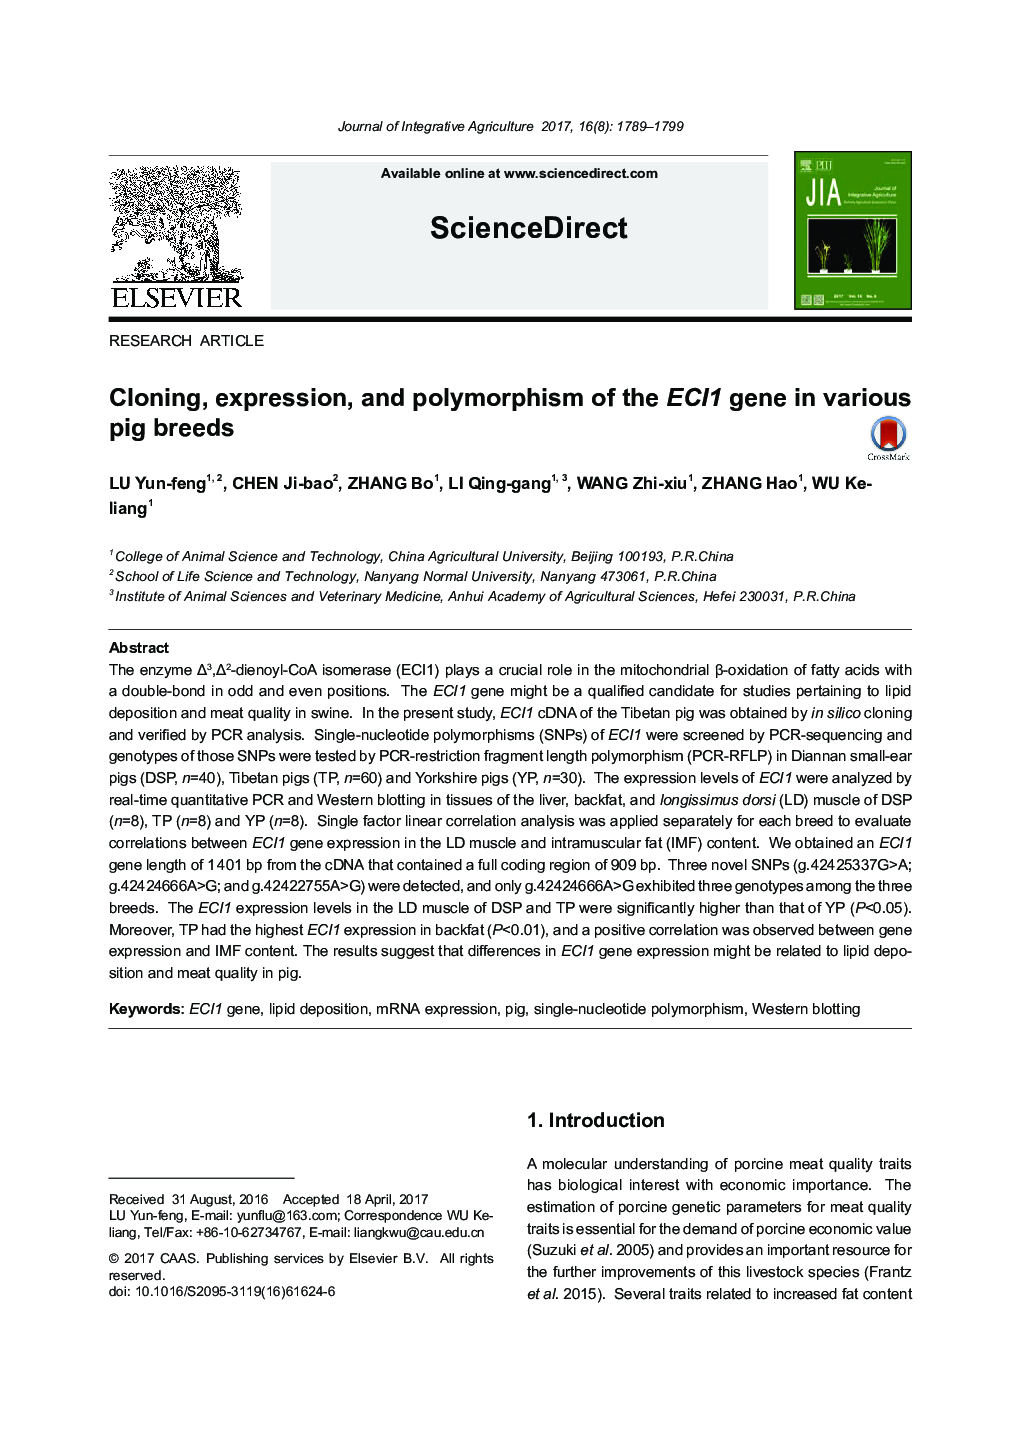 Cloning, expression, and polymorphism of the ECI1 gene in various pig breeds